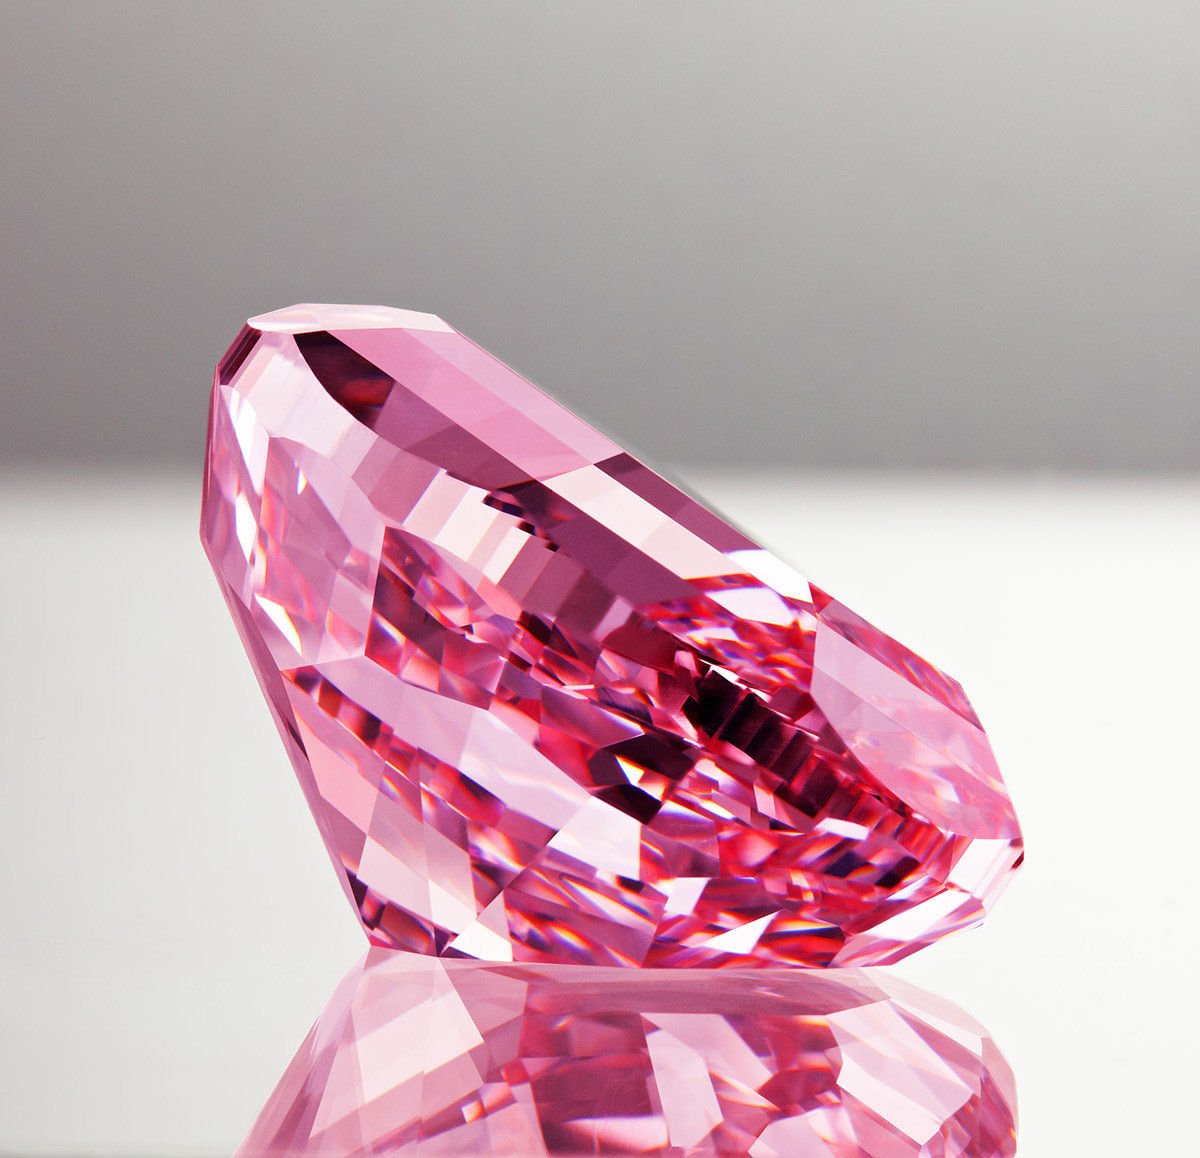 The &amp;quot;Pink Star&amp;quot; Diamond on Behance